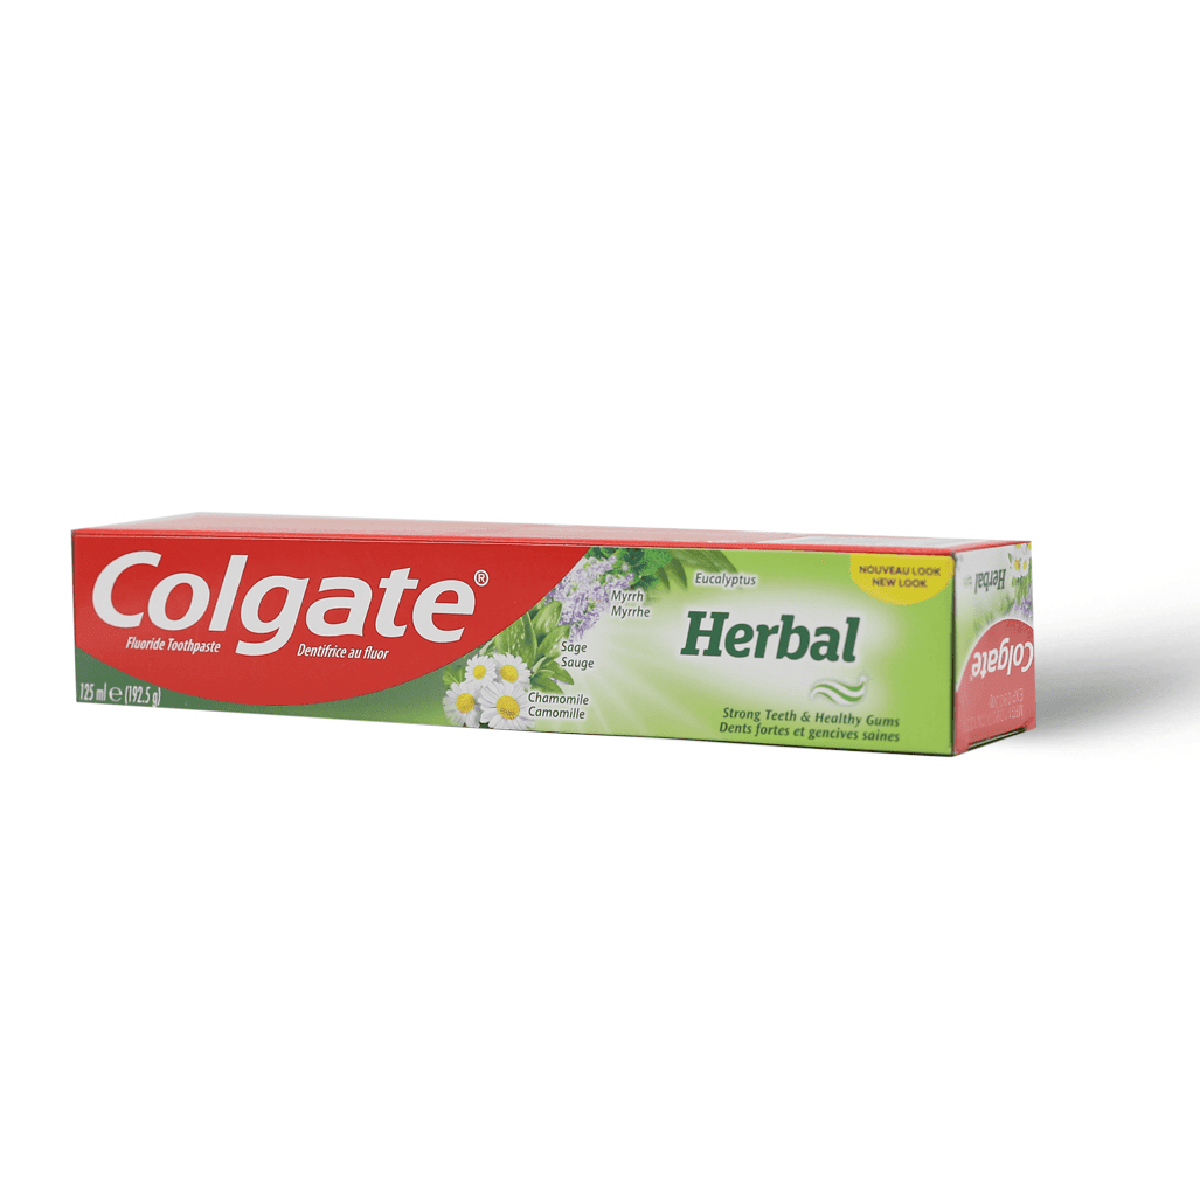 Colgate, Toothpaste, with Herbal - 125 Ml